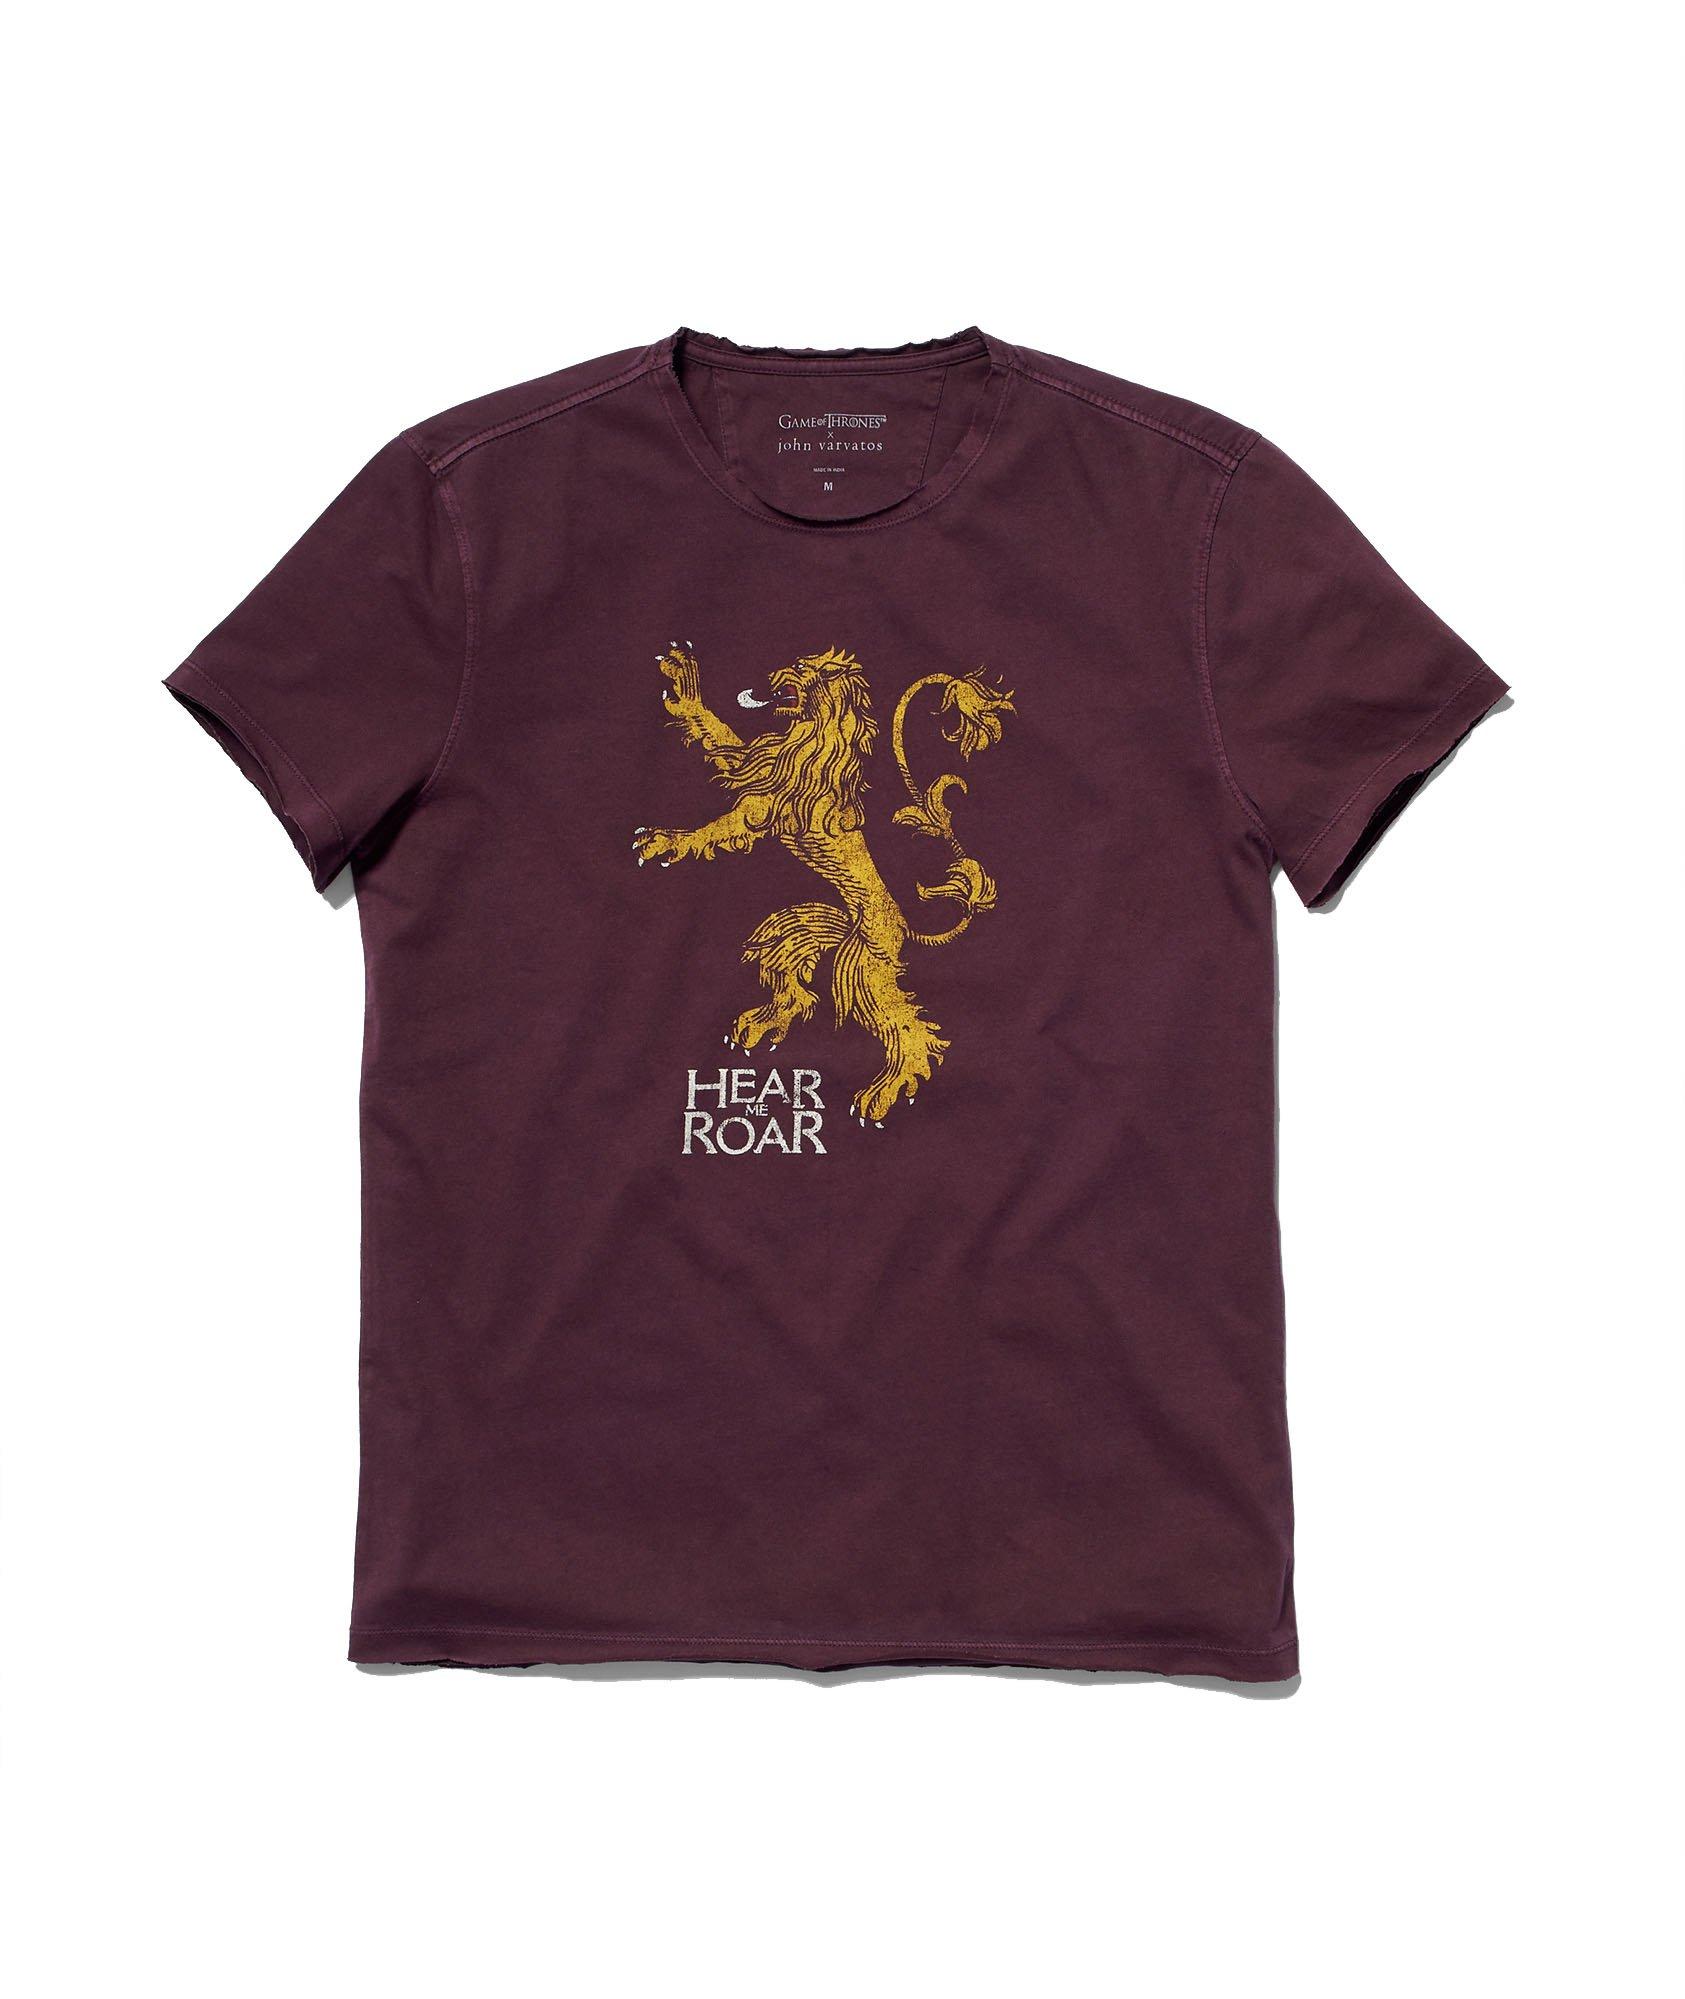 Game of Thrones Printed Cotton T-Shirt image 0